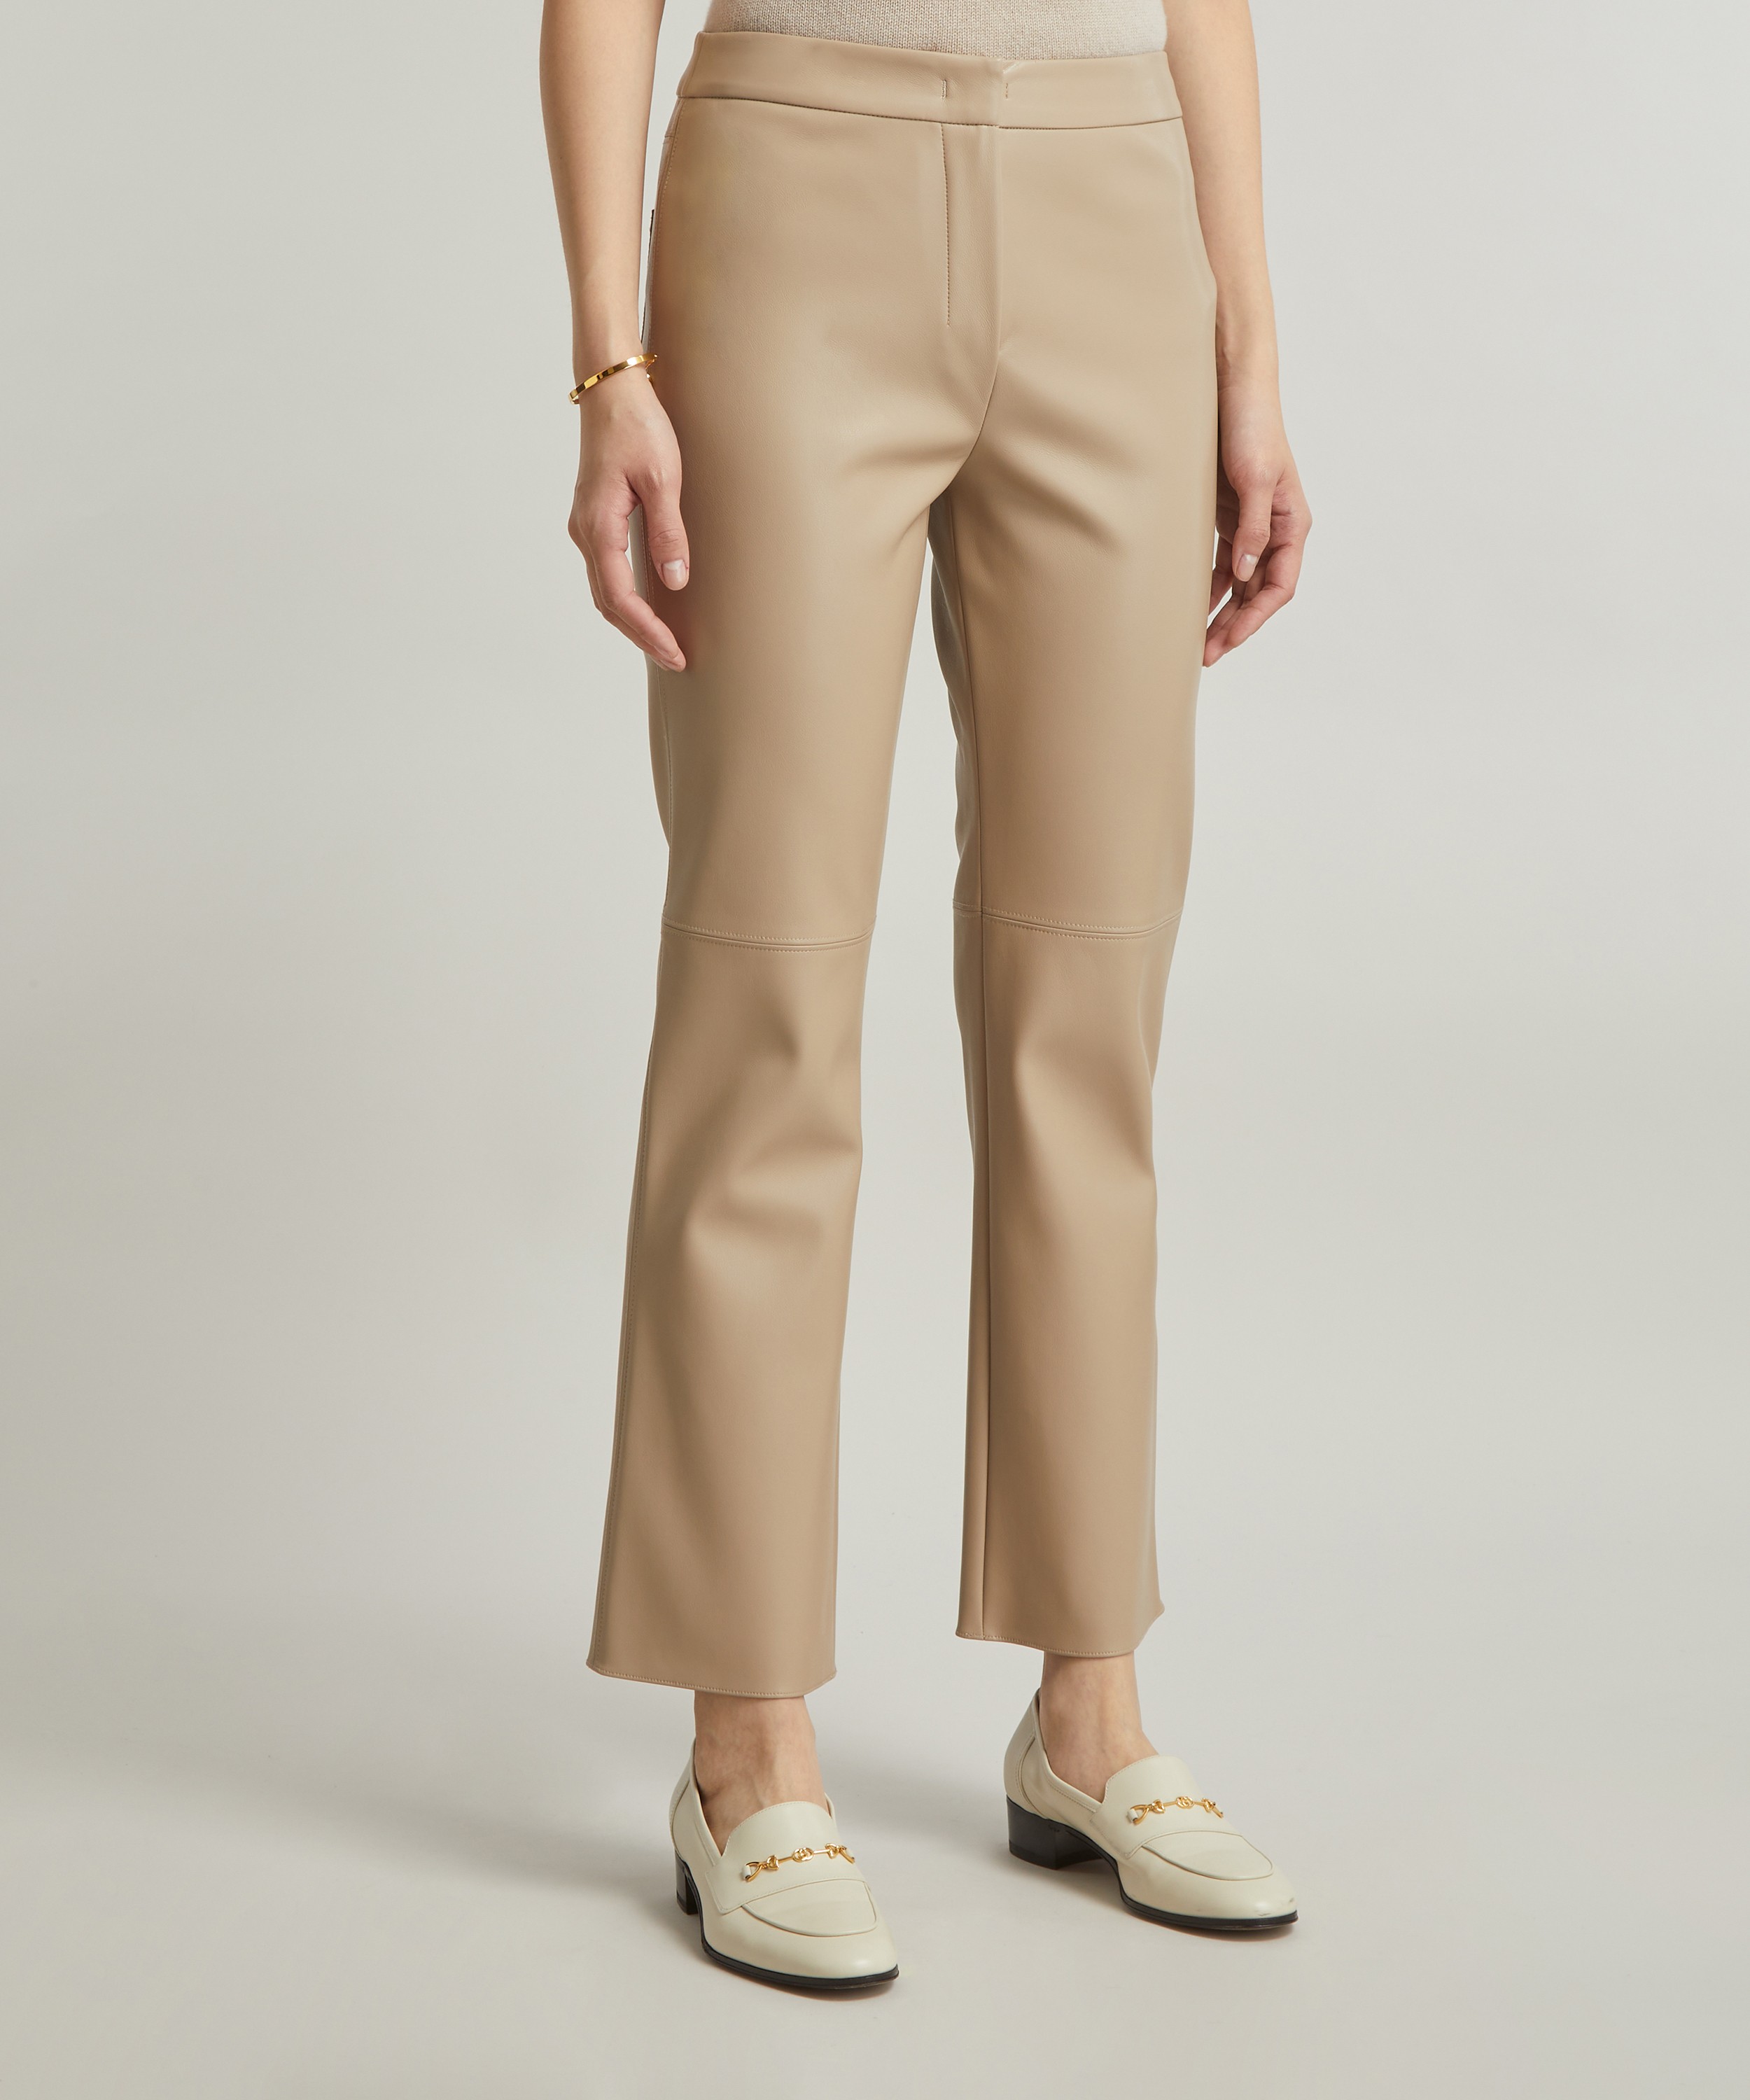 S Max Mara Sublime Coated-Look Jersey Trousers